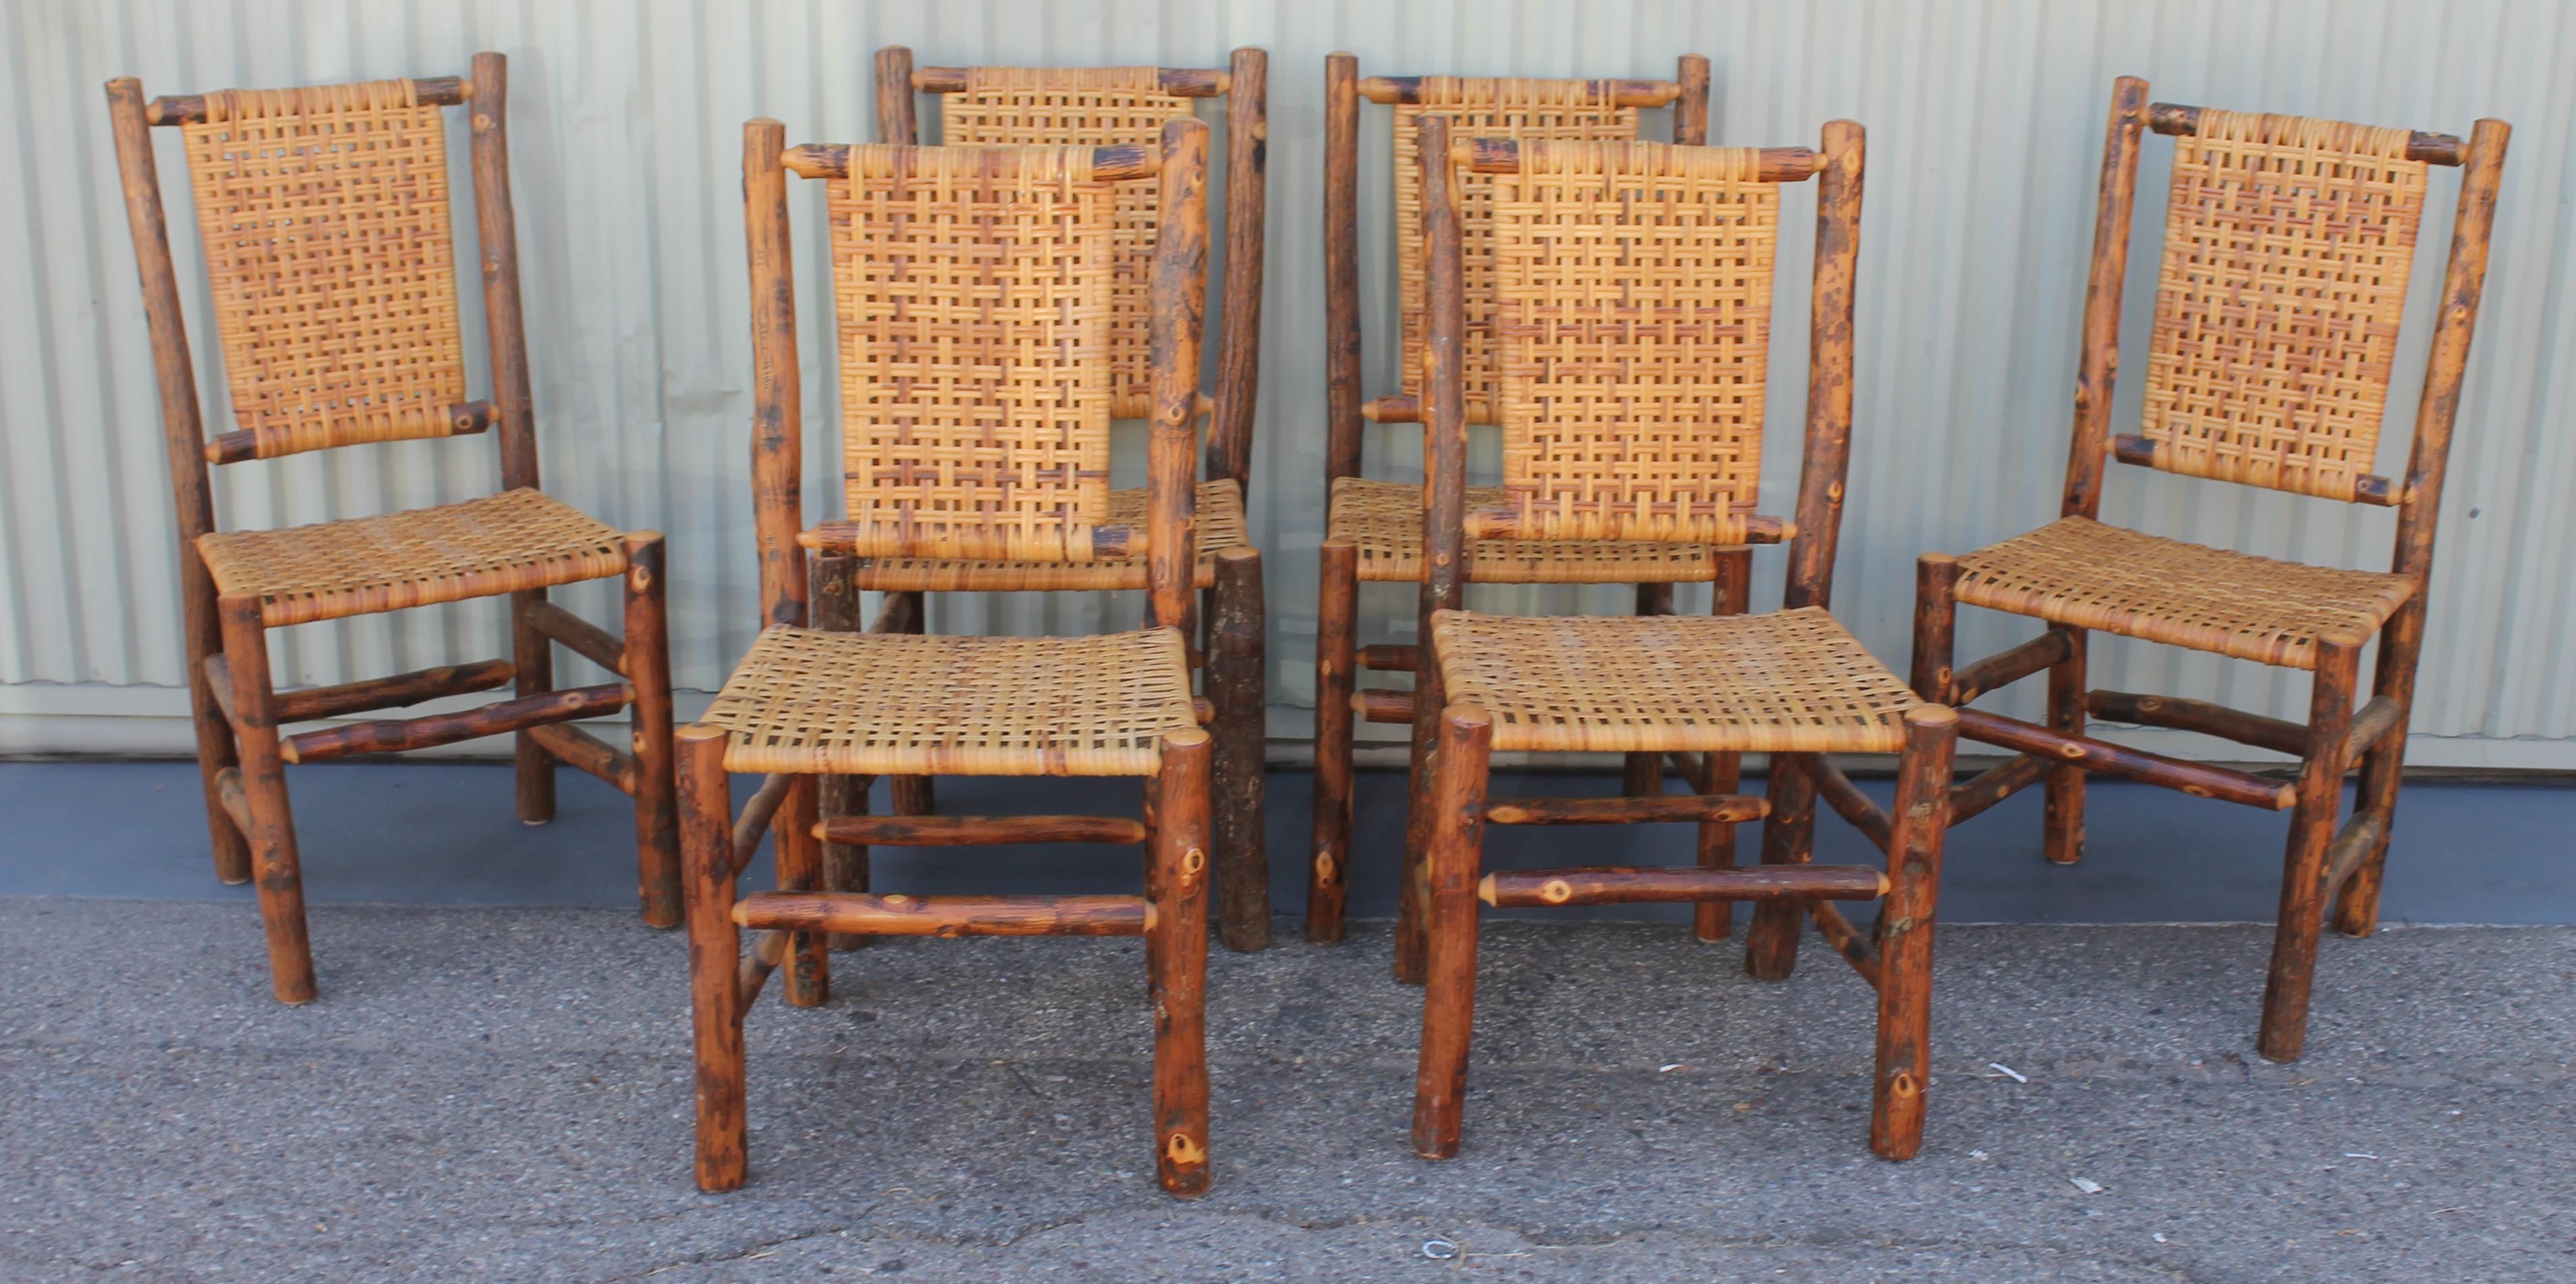 This set of Old Hickory chairs are late but great. Probably from the 1950s or 1960s but in fine condition. The seats and backs are all original.